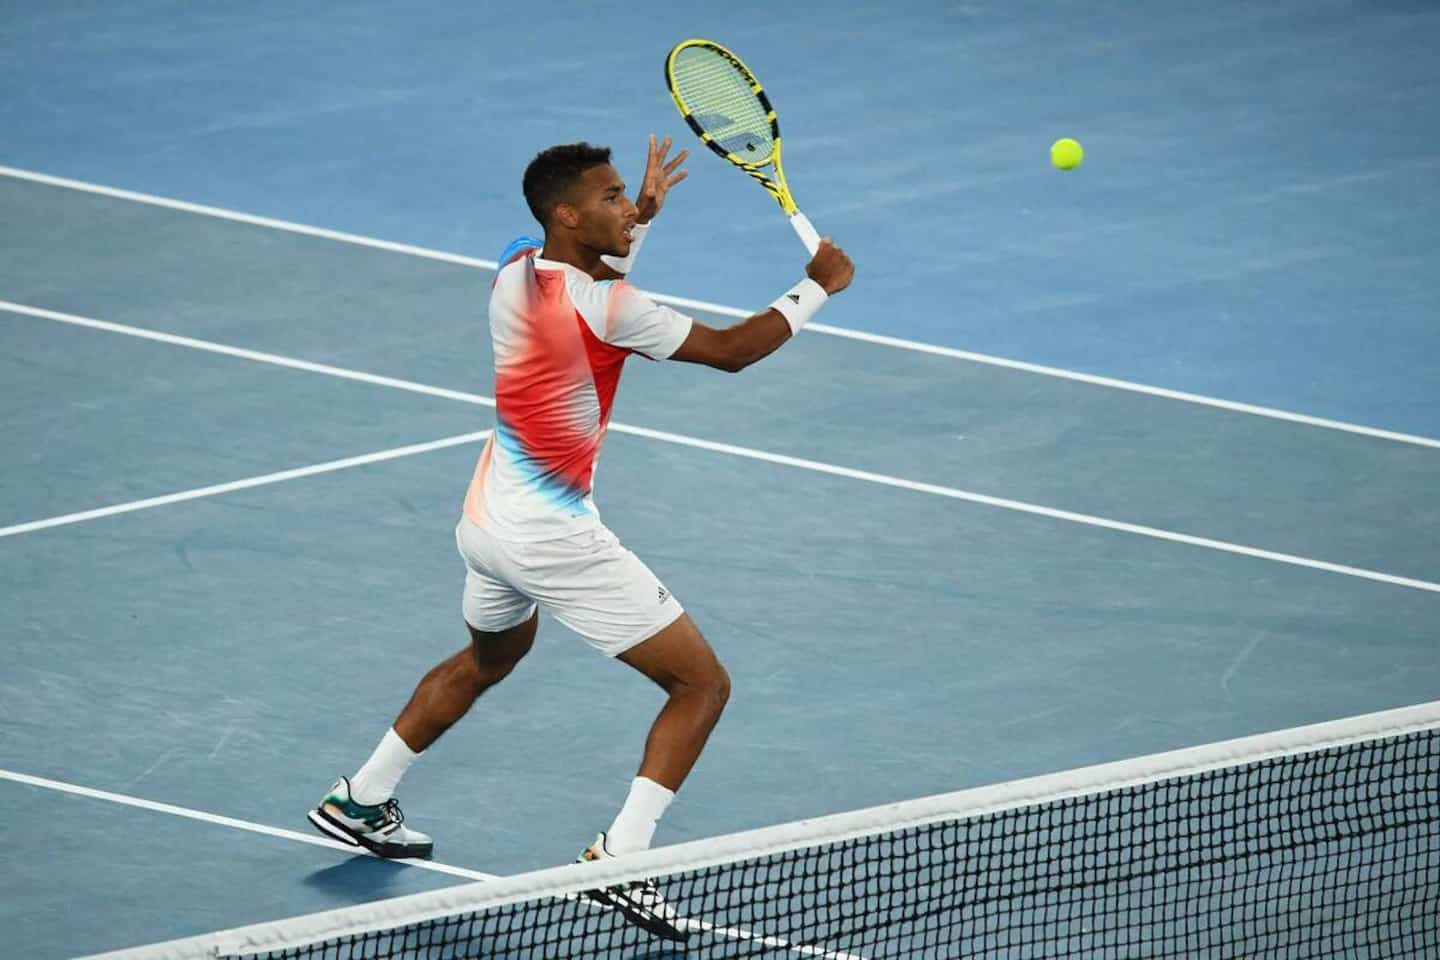 National Bank Open: Félix Auger-Aliassime among the top seeds in Montreal